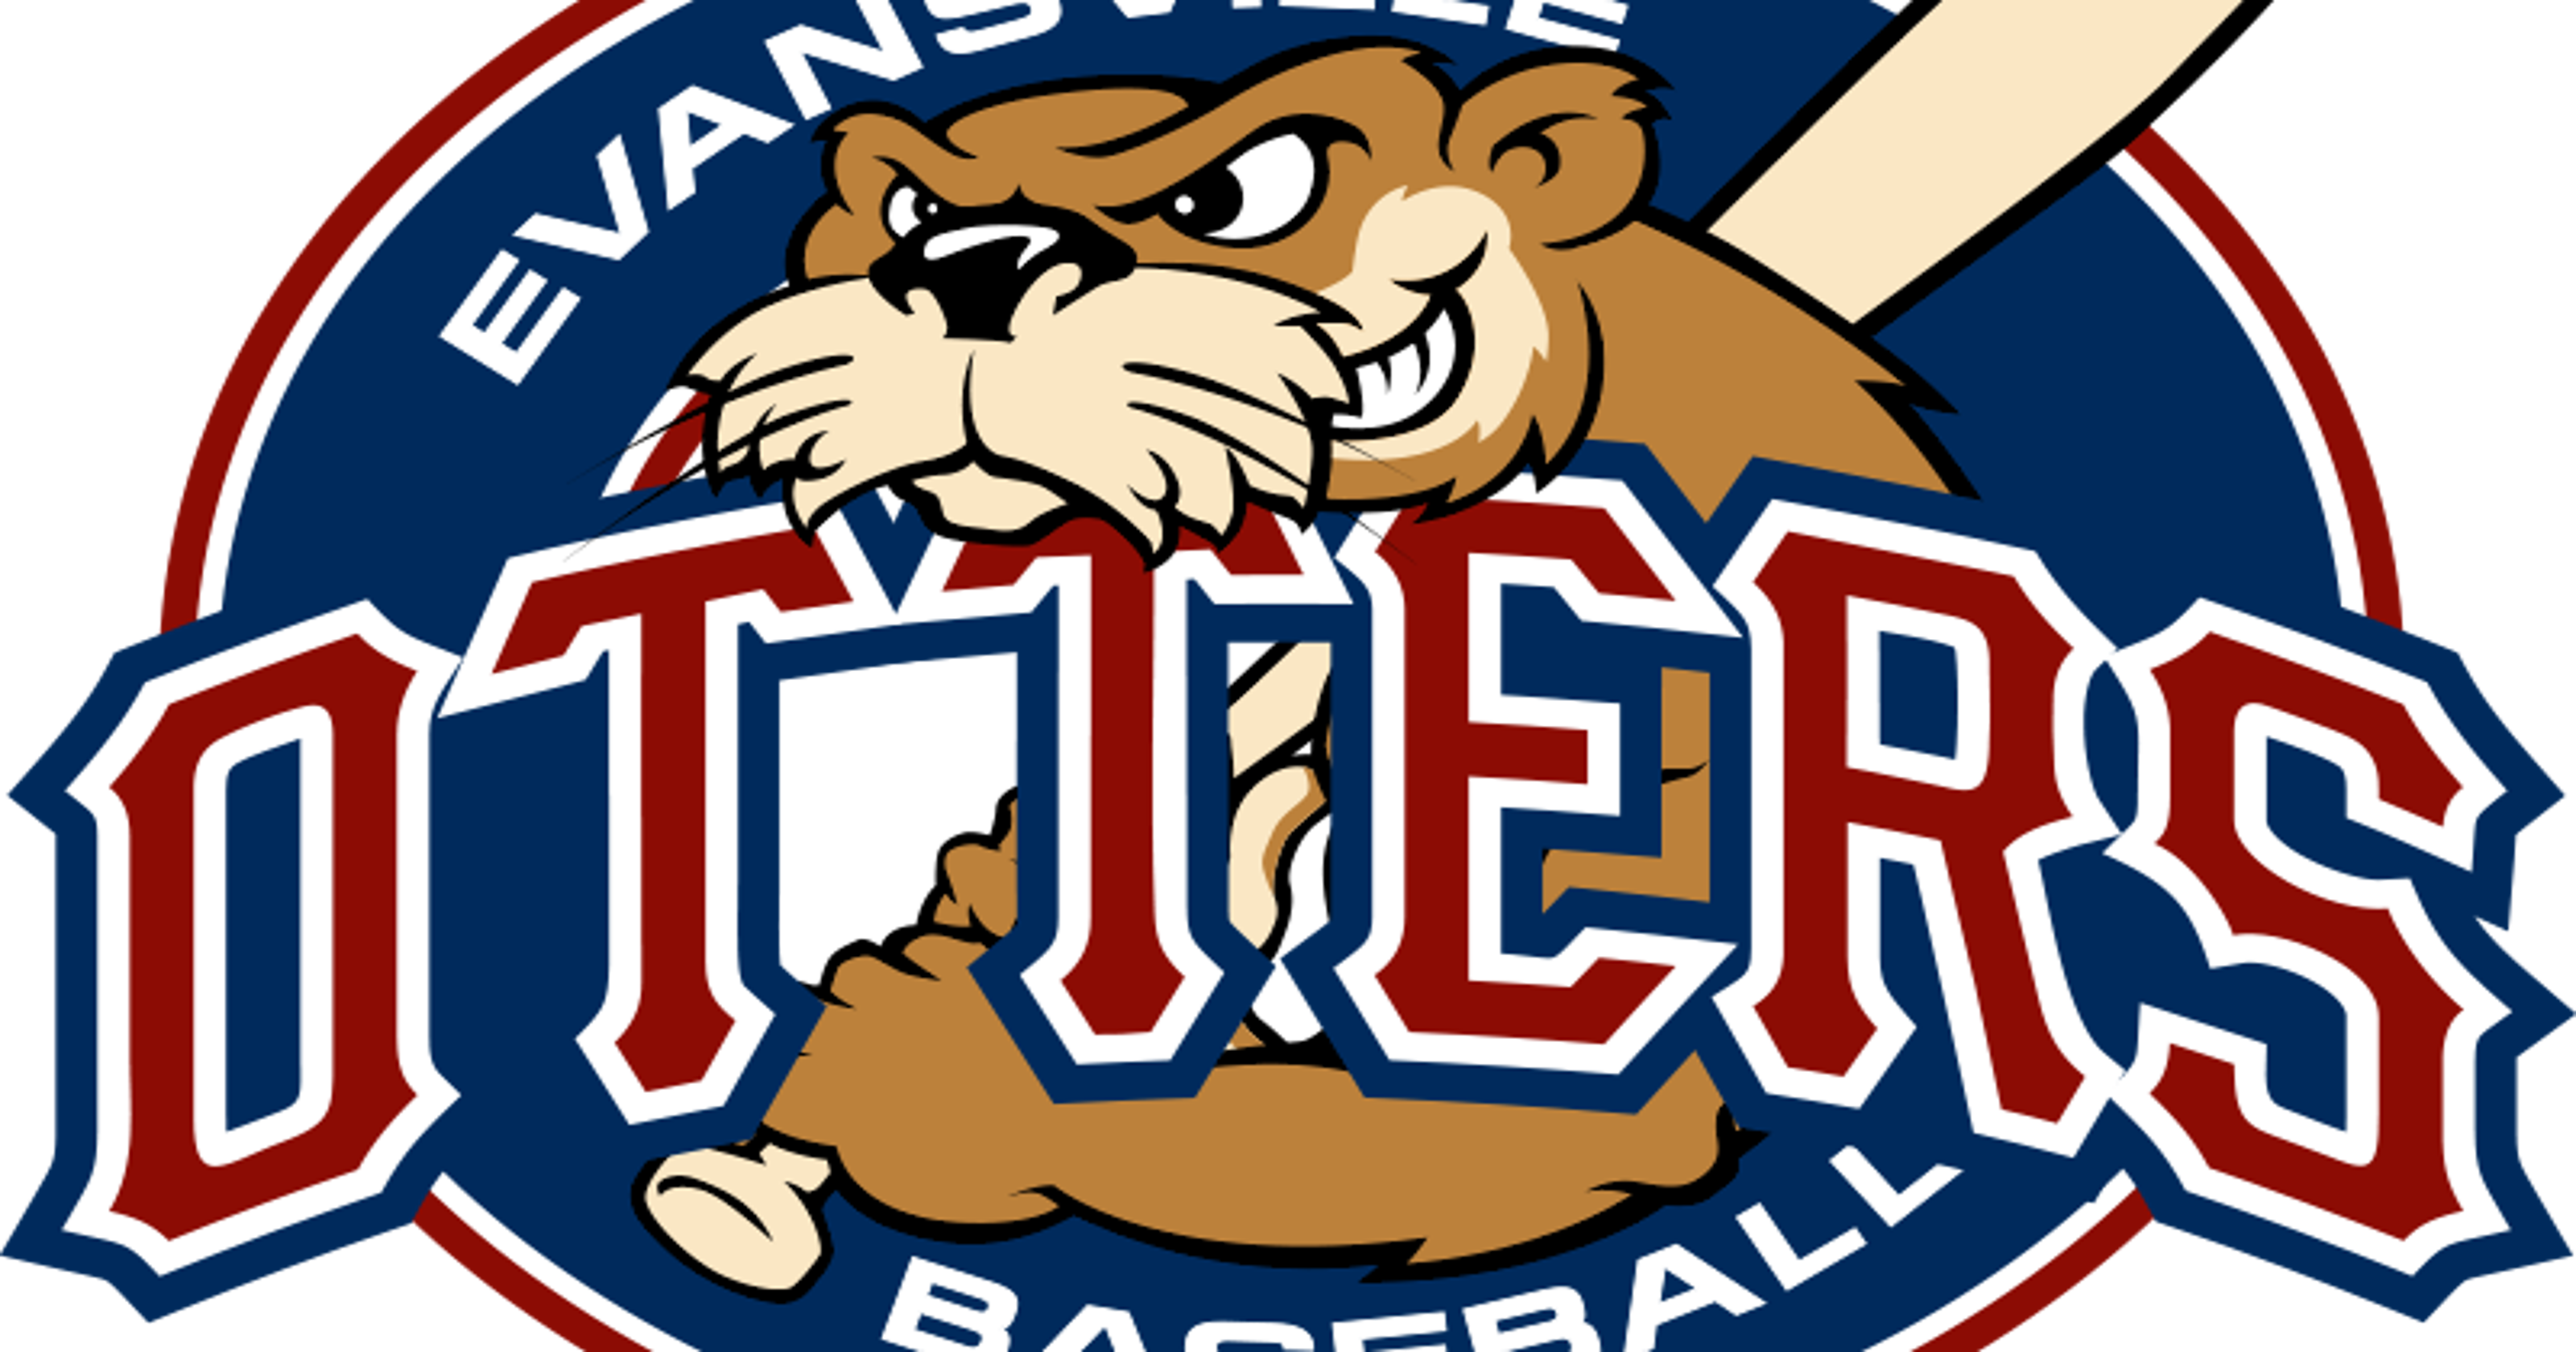 River City Rascals leave Frontier League after 21 years